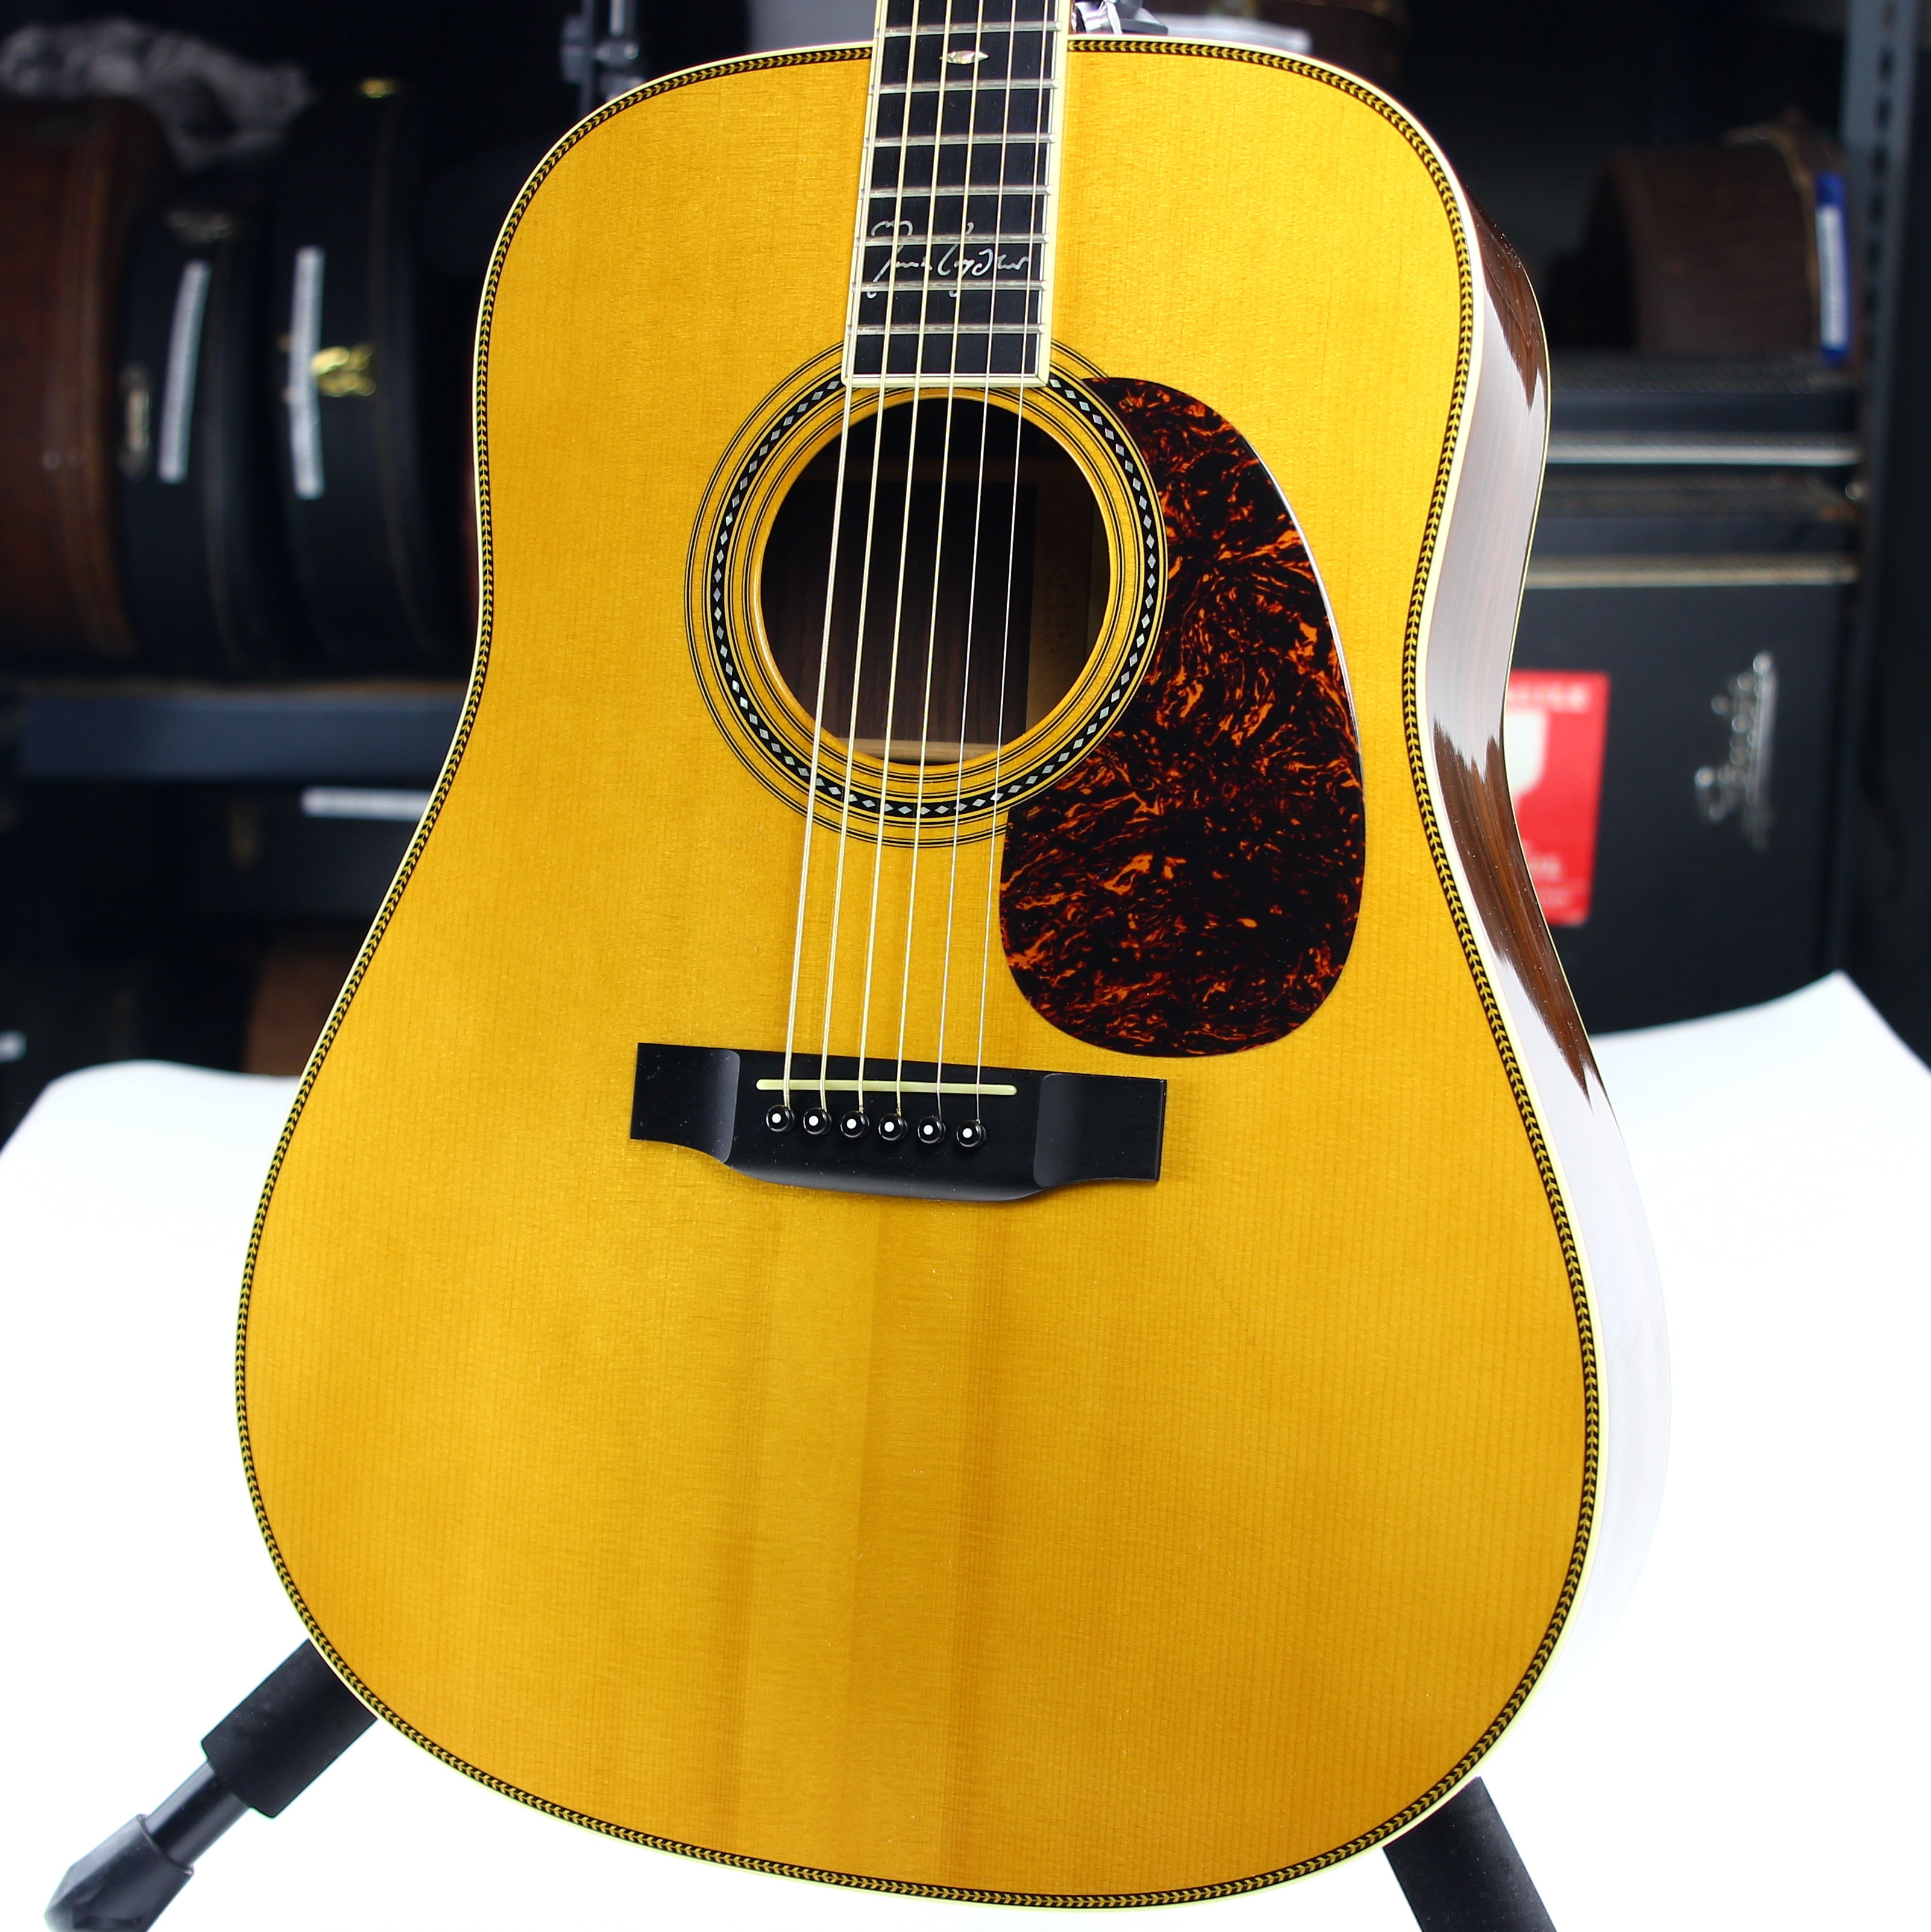 2002 Martin HD-40MK Mark Knopfler SIGNED Acoustic Dreadnought Guitar - Italian Alpine Spruce/Rosewood - Limited Edition